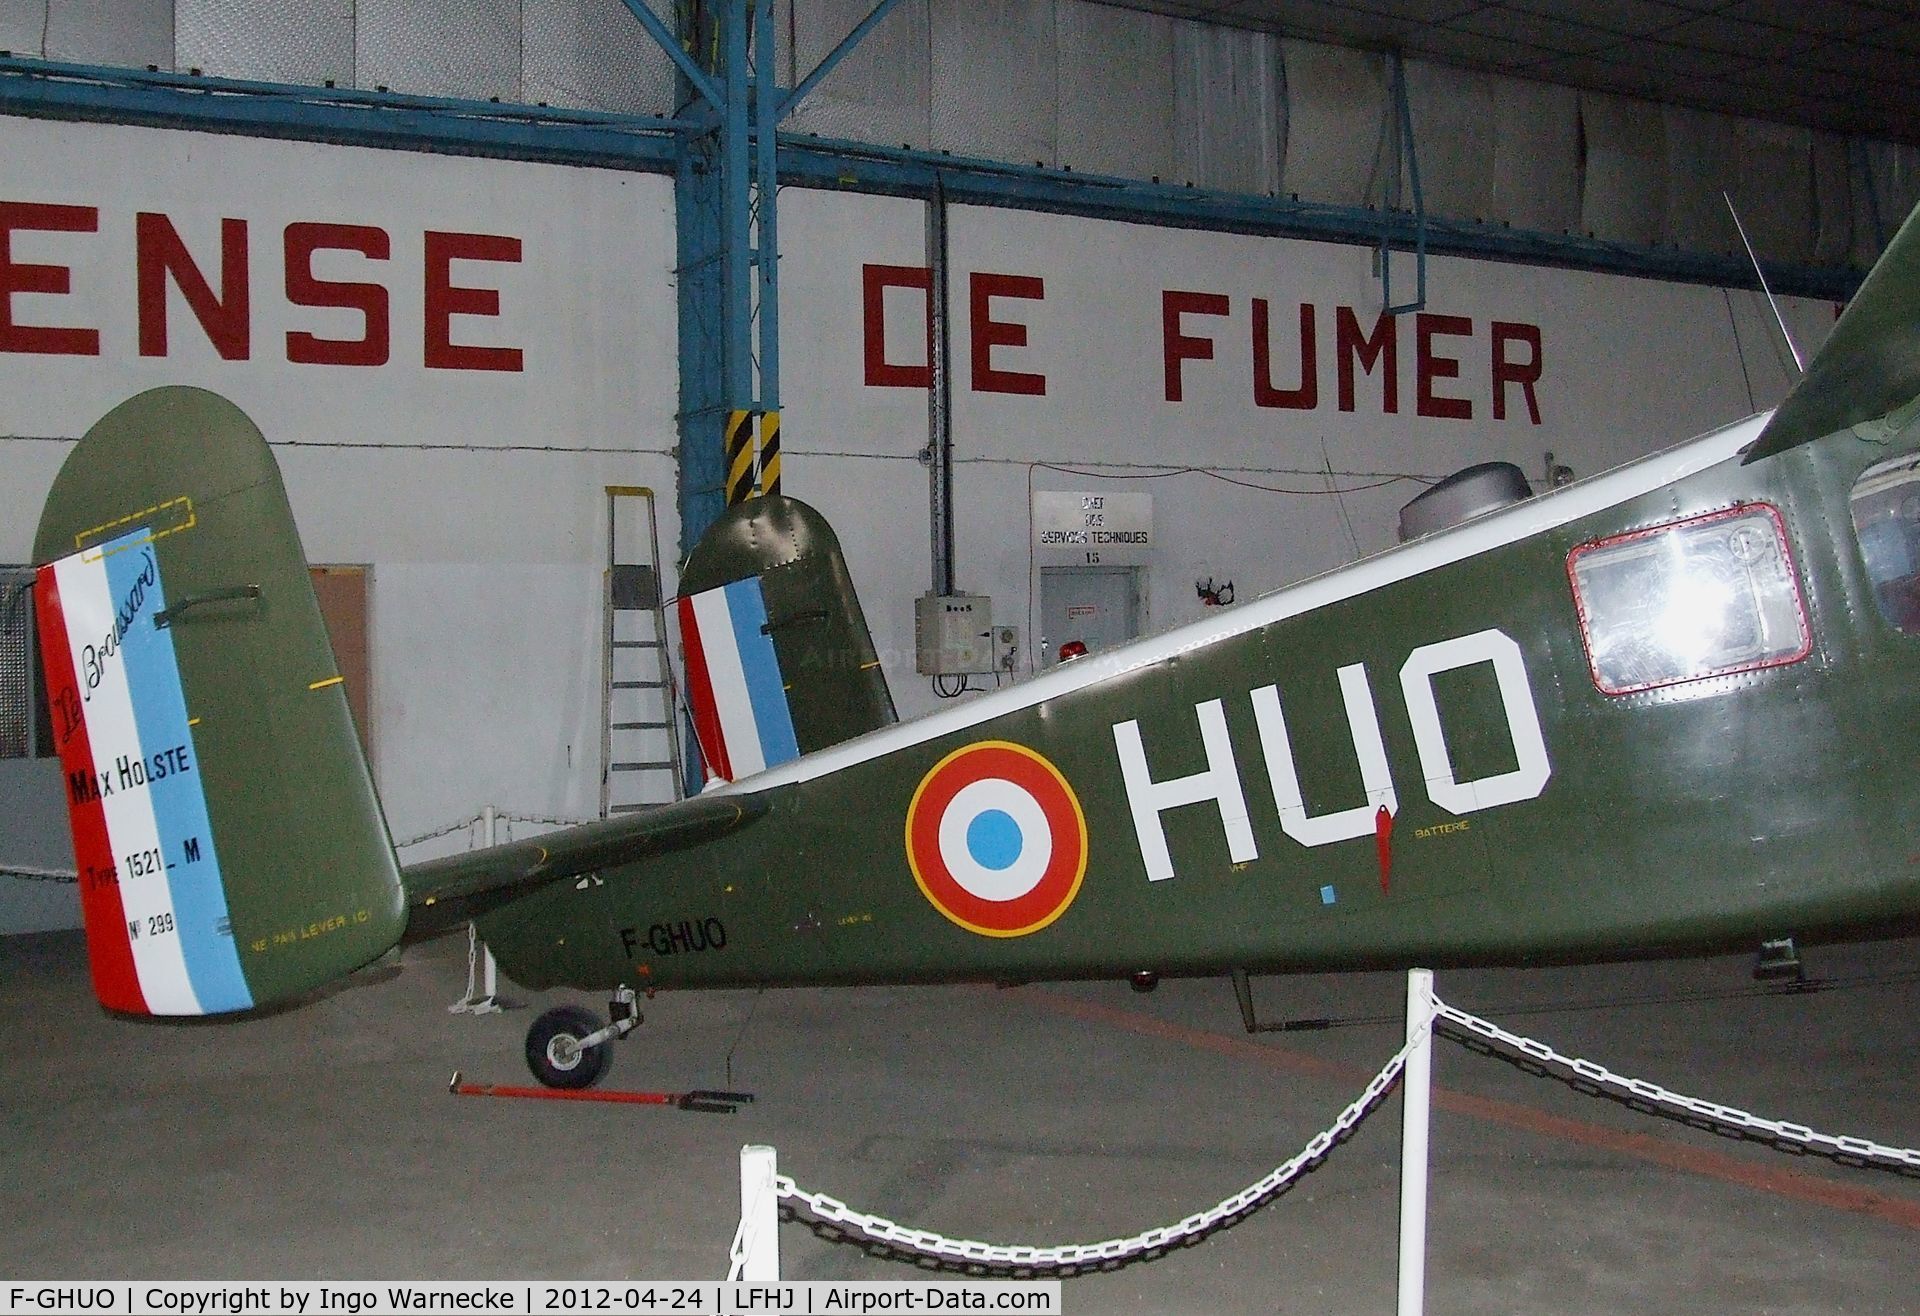 F-GHUO, Max Holste MH-1521C-1 Broussard C/N 299, Max Holste MH.11521C-1 Broussard at the EALC Musee de l'Aviation Clement Ader, Lyon-Corbas